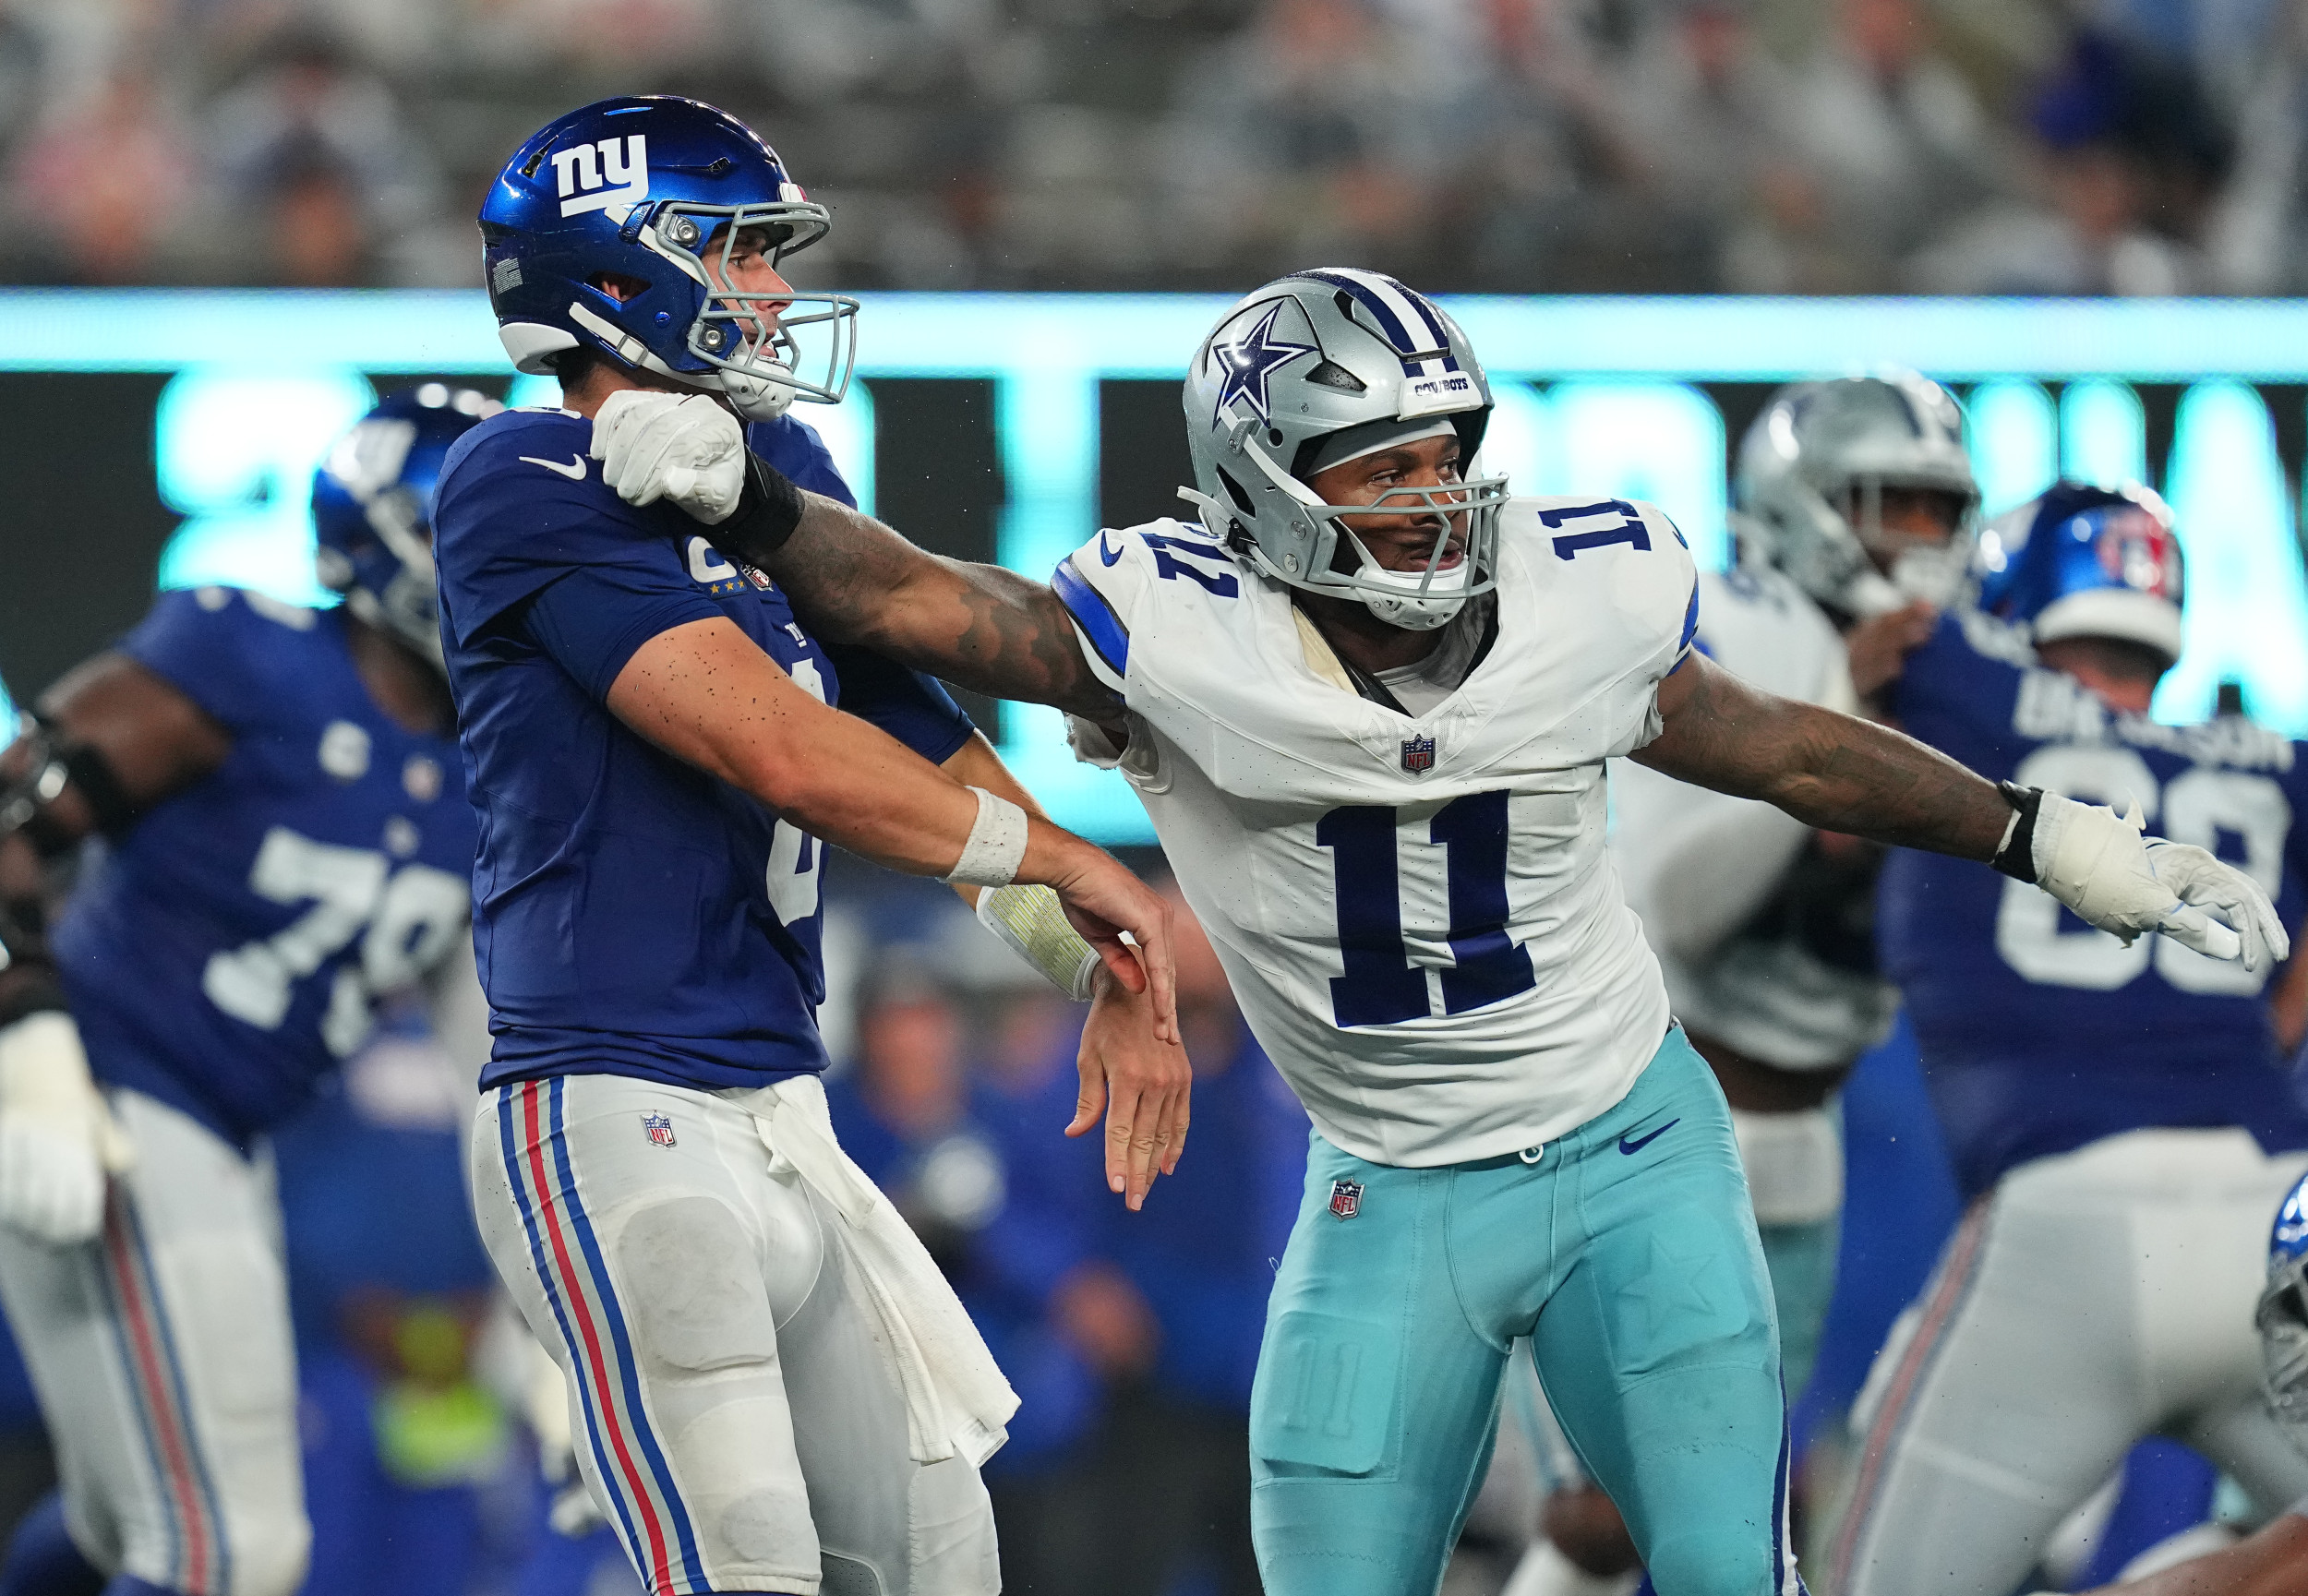 Best Defense in the NFL': Micah Parsons Boasts After Cowboys Thrash Giants